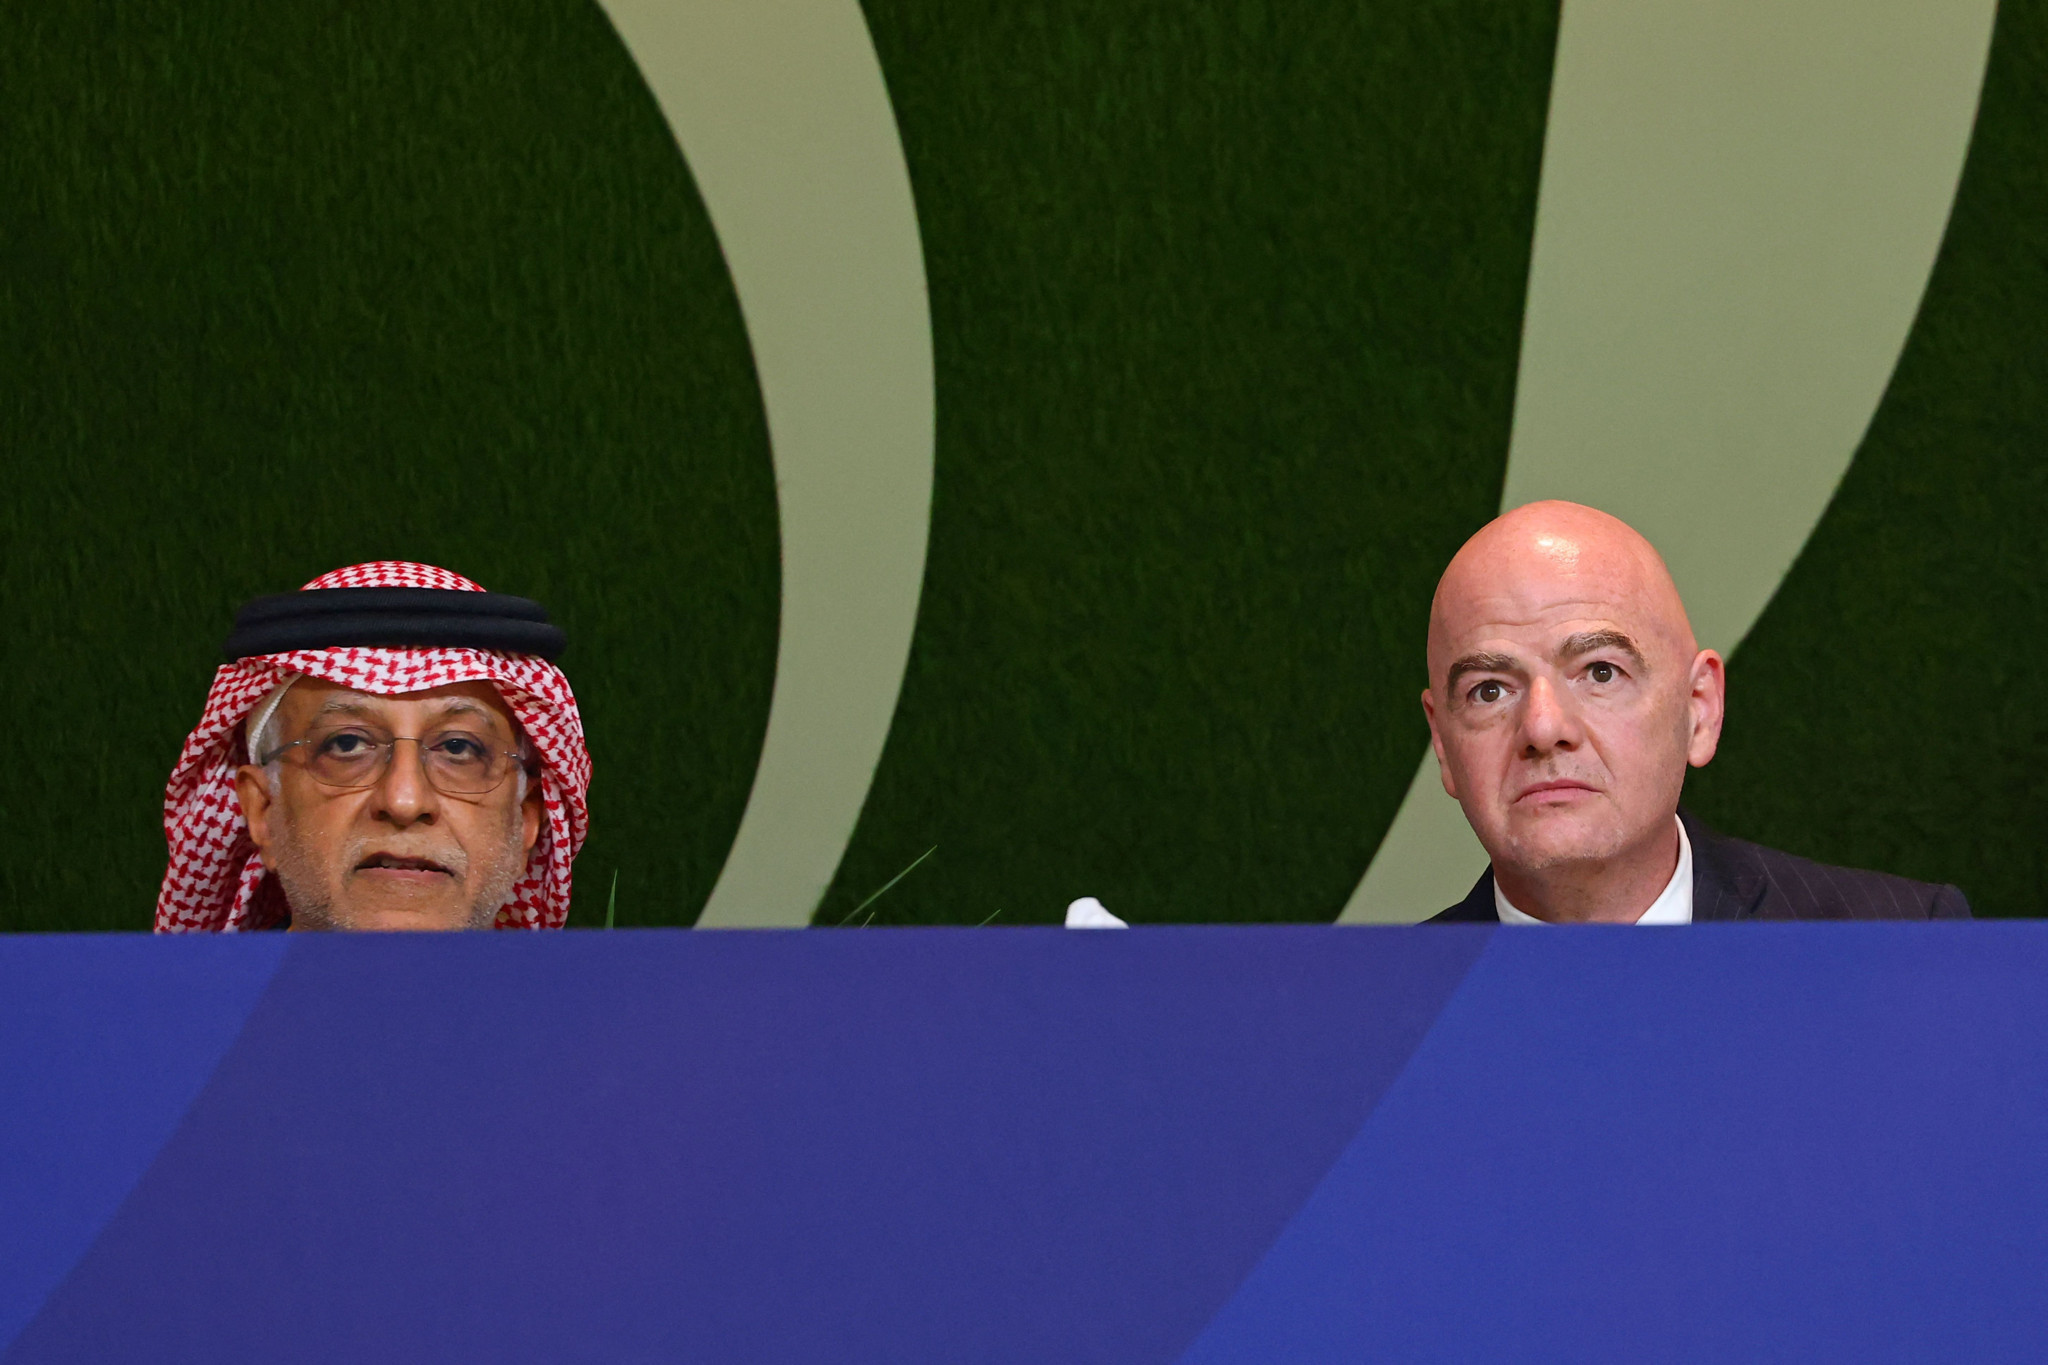 Shaikh Salman bin Ebrahim Al Khalifa pledged the AFC's "wholehearted support" for Gianni Infantino's re-election as FIFA President ©Getty Images